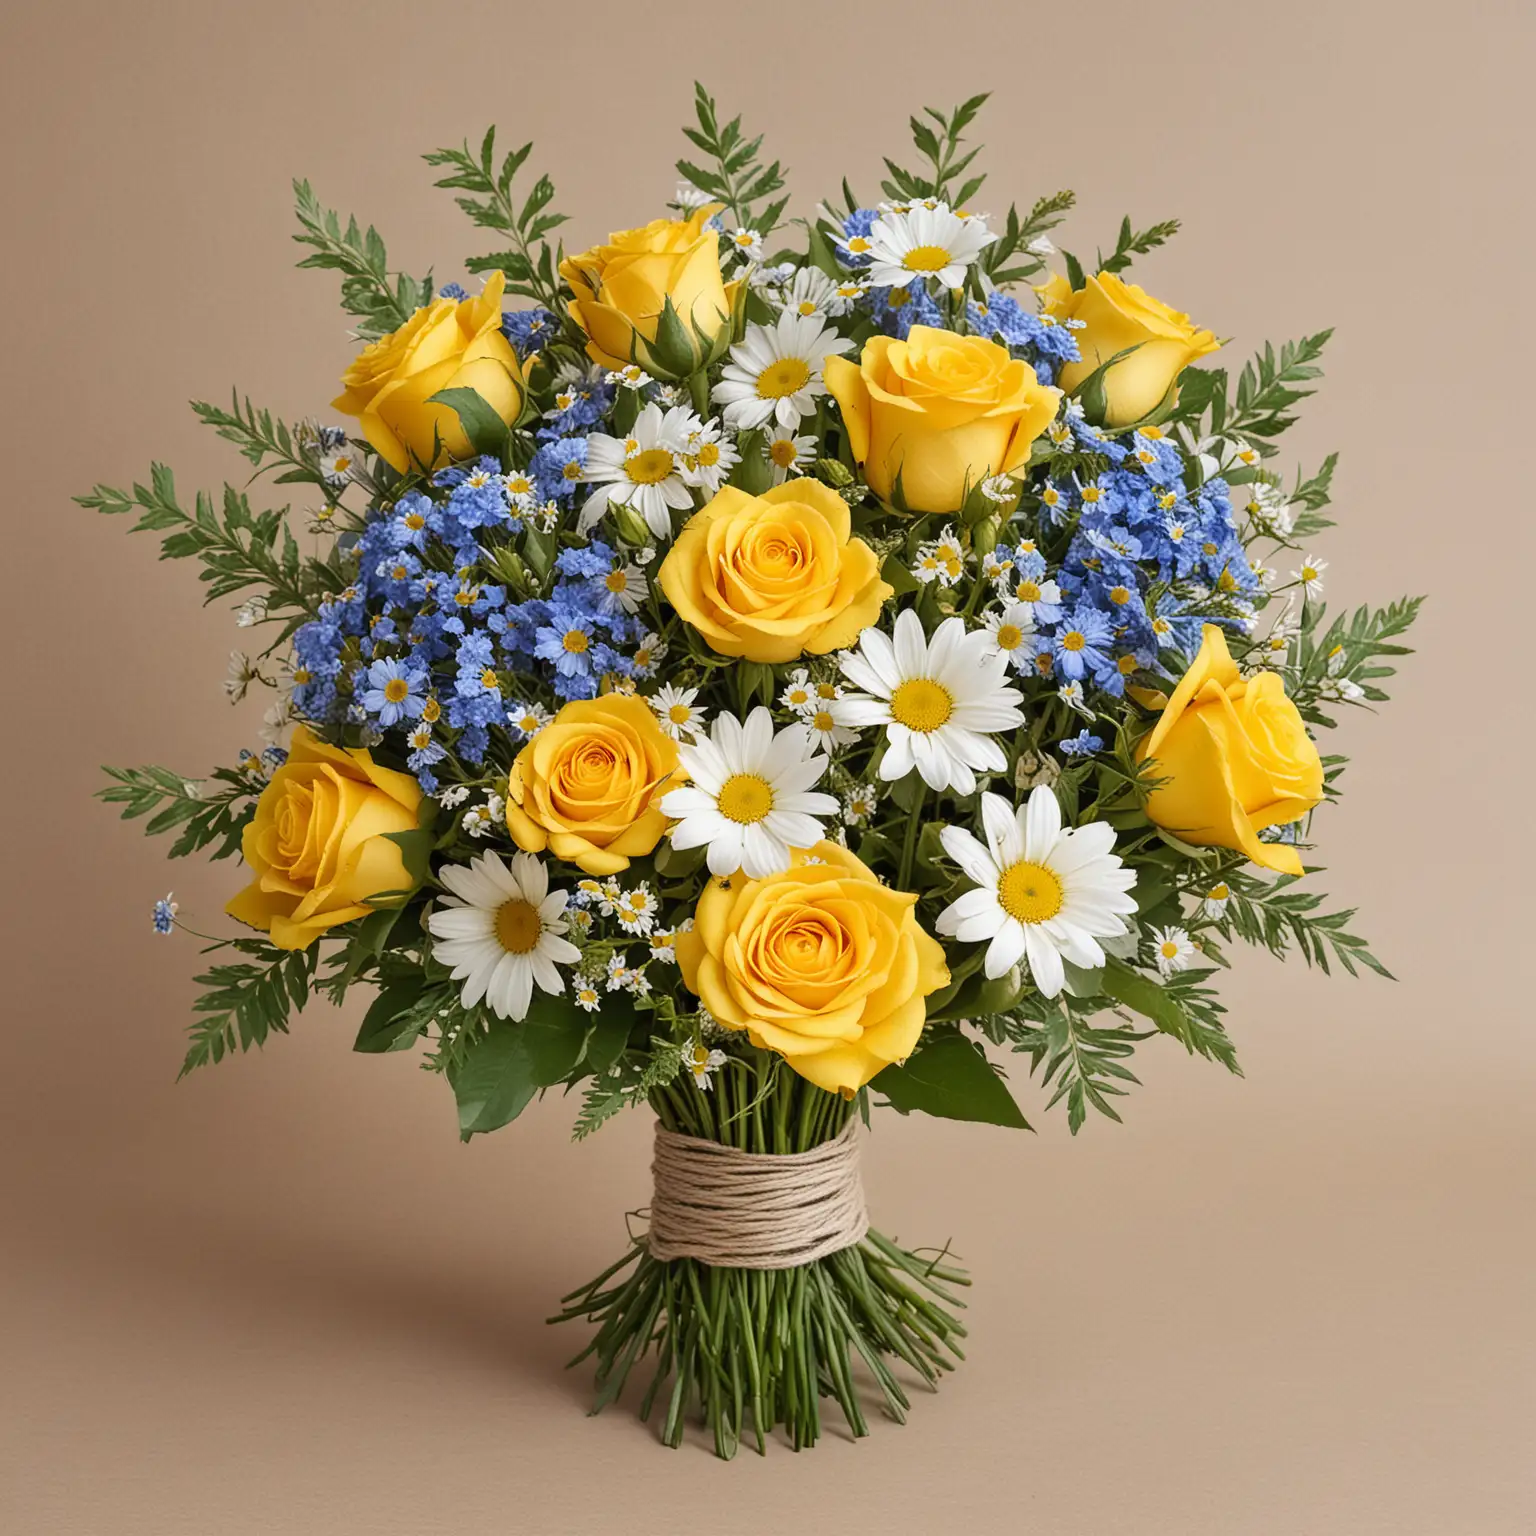 Wildflower-Bouquet-Greeting-Card-with-Yellow-Roses-White-Daisies-and-Blue-Flowers